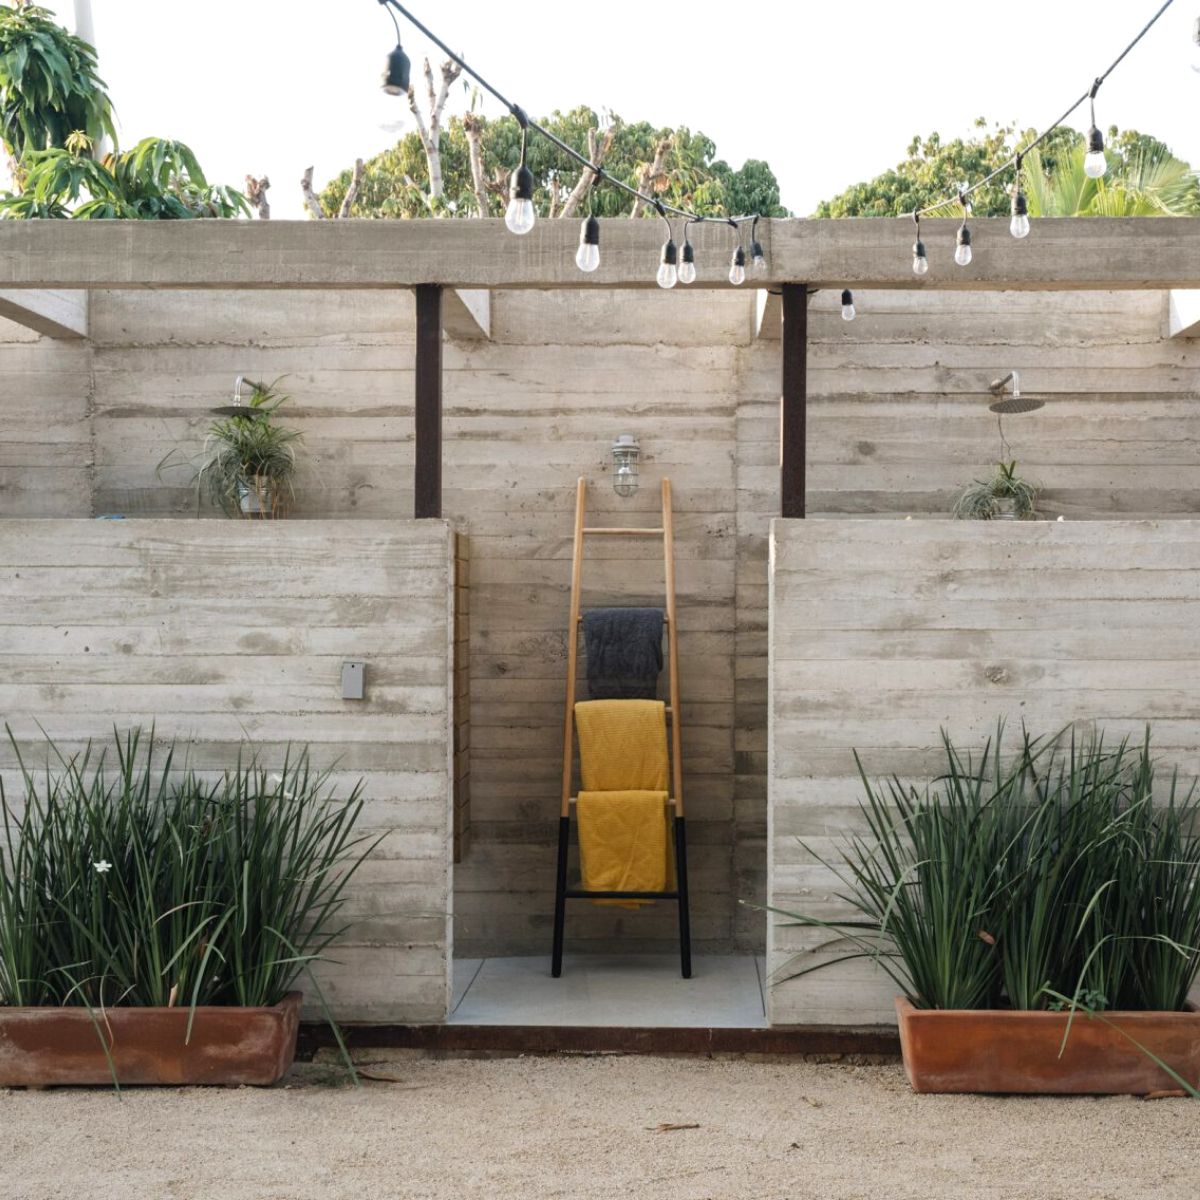 Outdoor showers featured